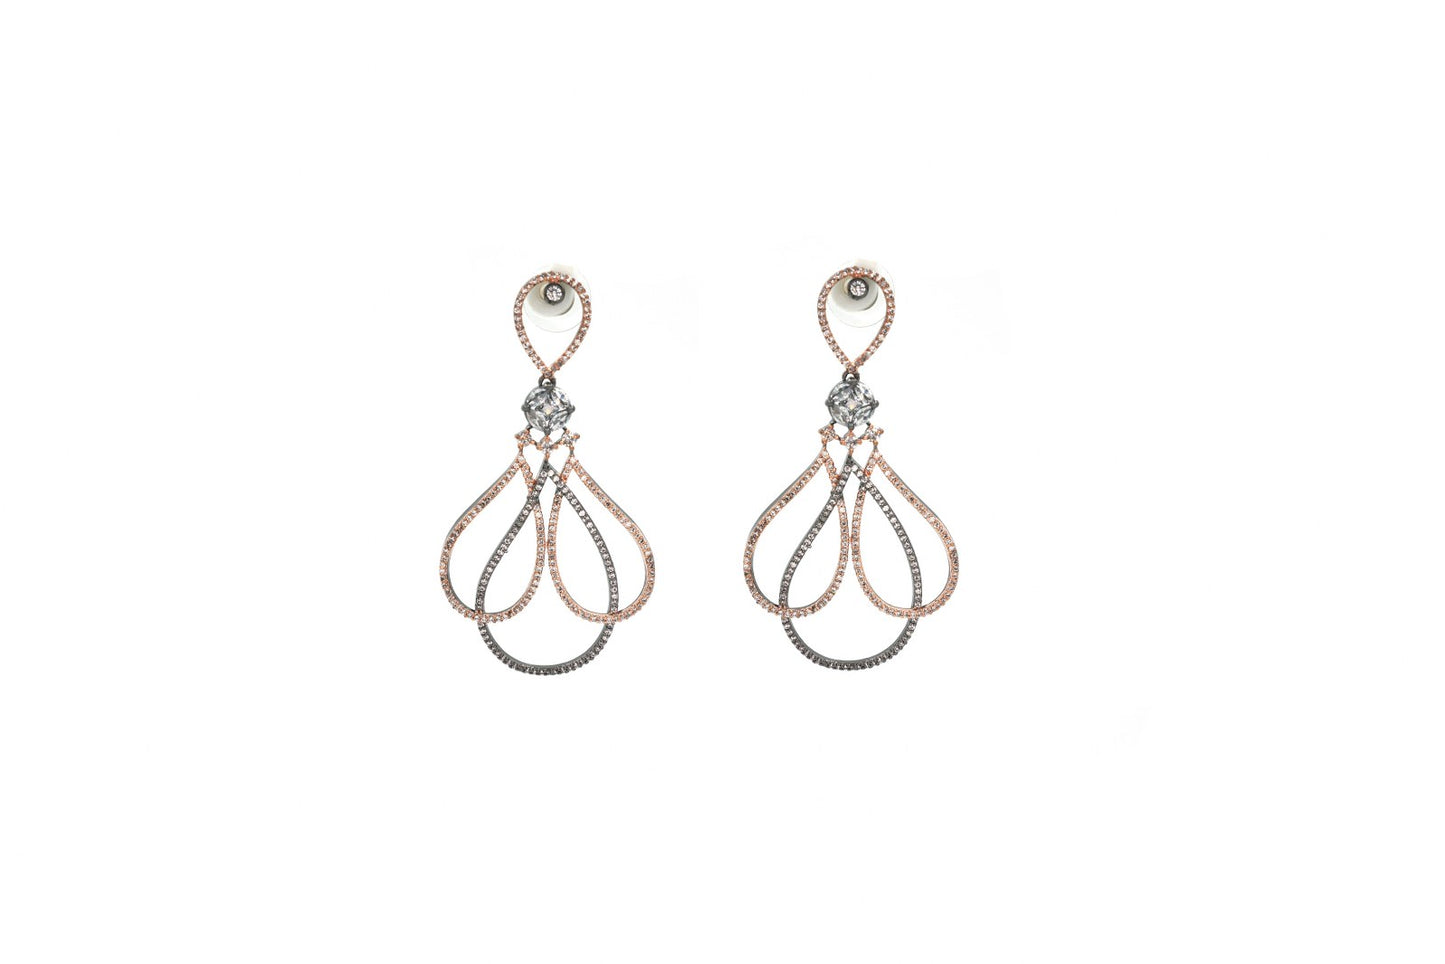 AD EARRINGS WITH ROSEGOLD & BLACK COLOUR RHODIUM PLATING